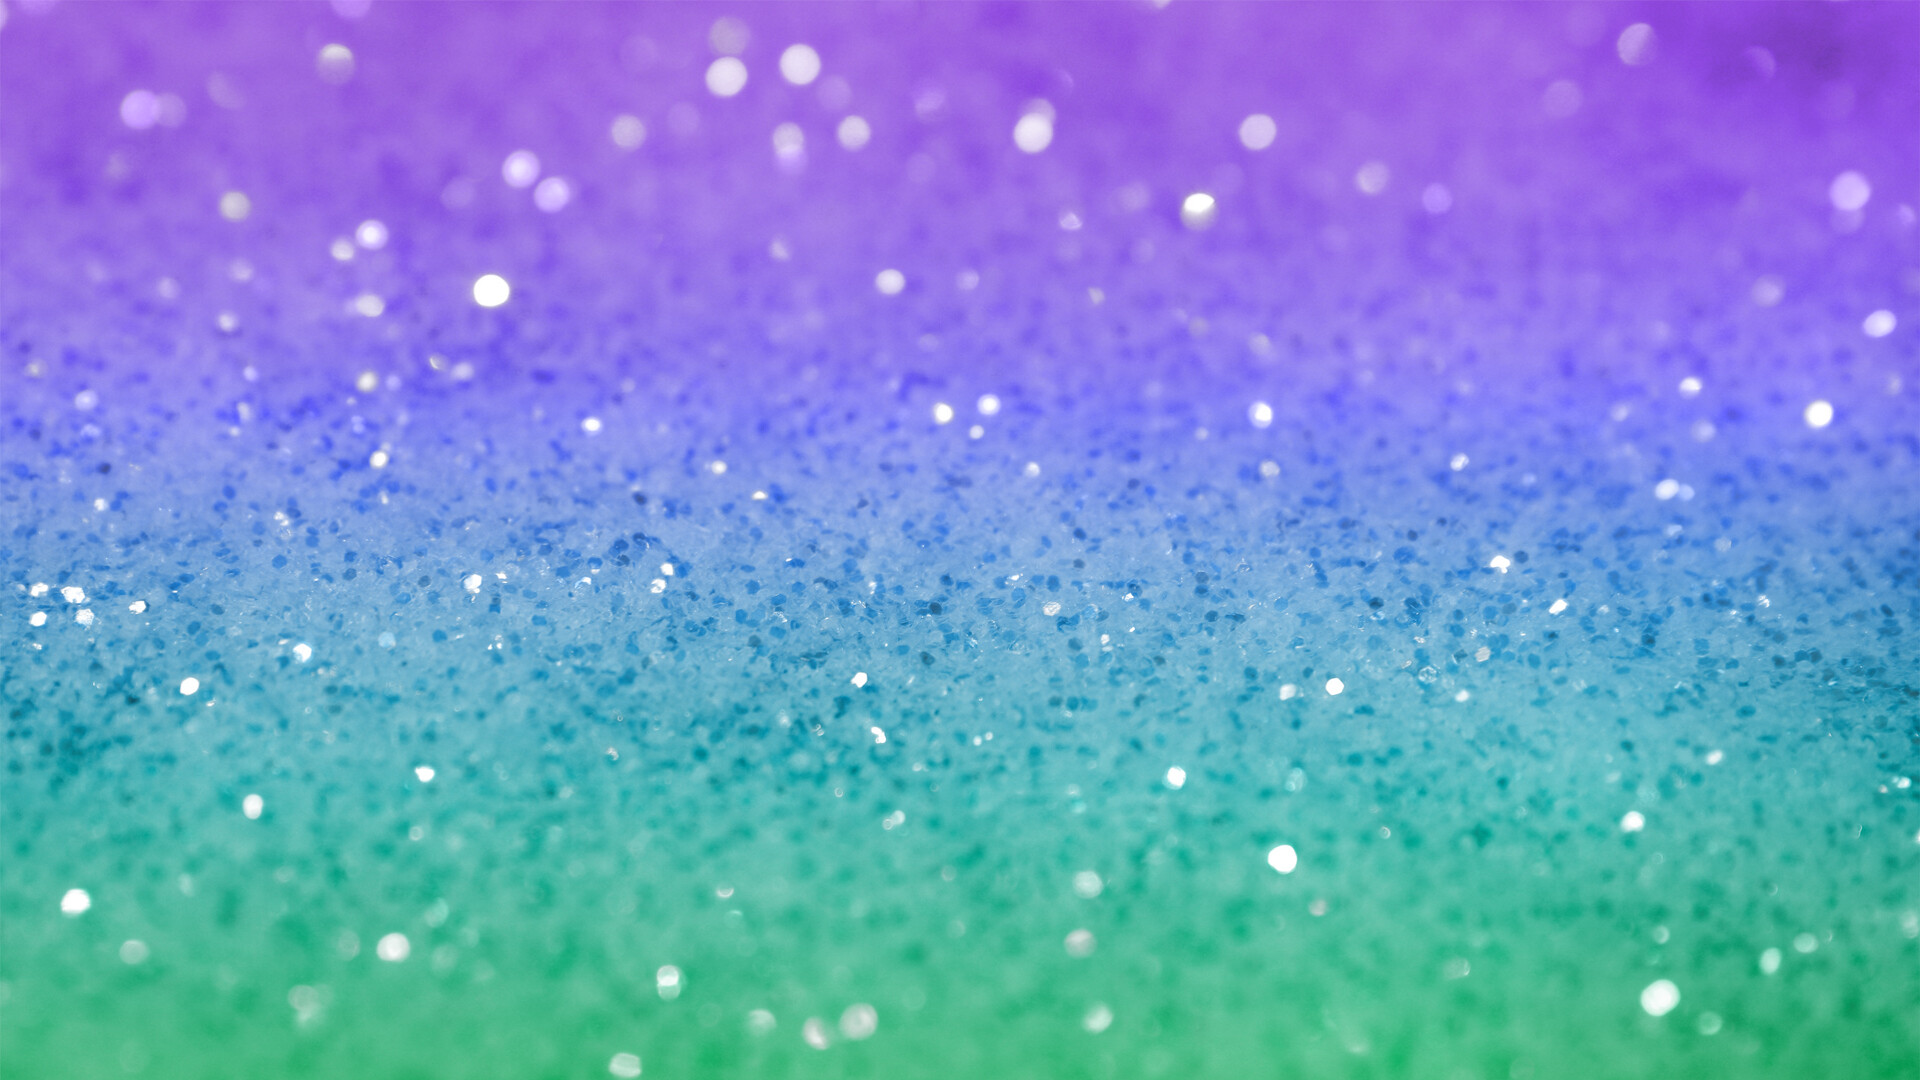 Sparkle: The small, brightly colored particles, Glitter. 1920x1080 Full HD Wallpaper.